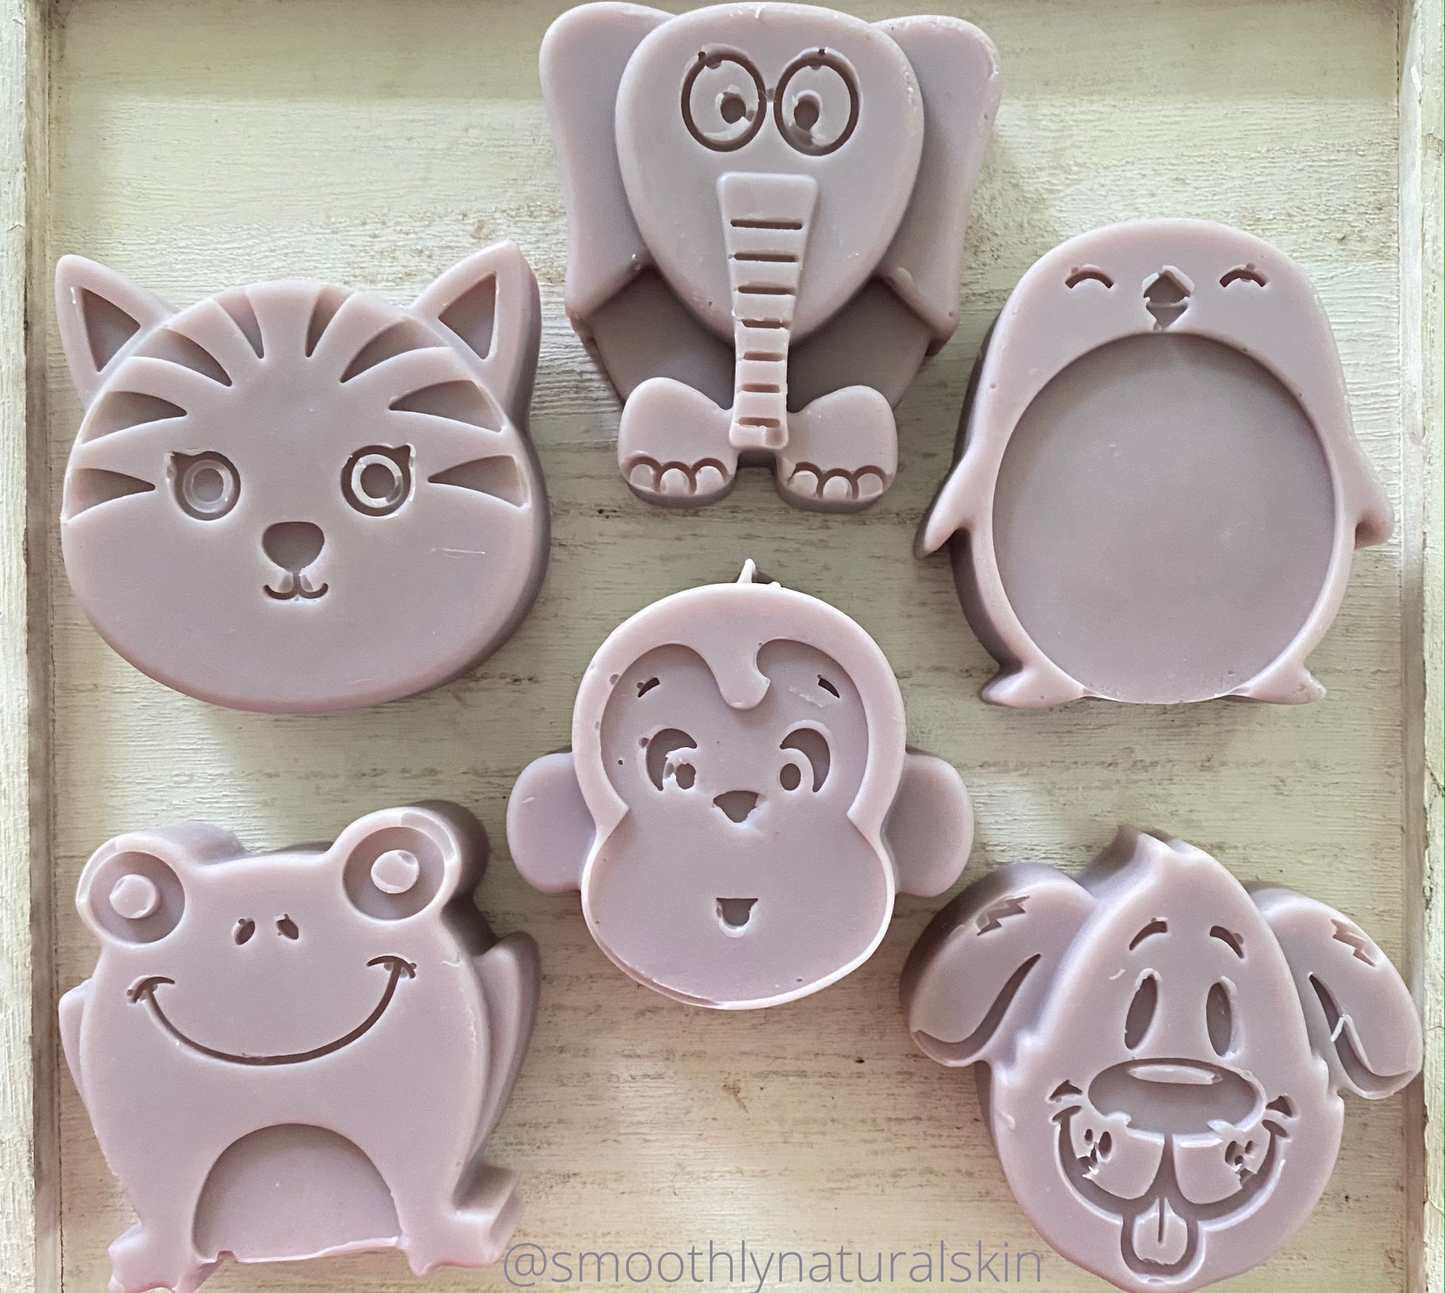 Lavender Soap is also made for the little ones. These fun animal shapes soaps are perfect for kid's little hands. It has a wonderful aroma of true lavender flowers, soft, fresh and clean. Smoothly Natural Skin 